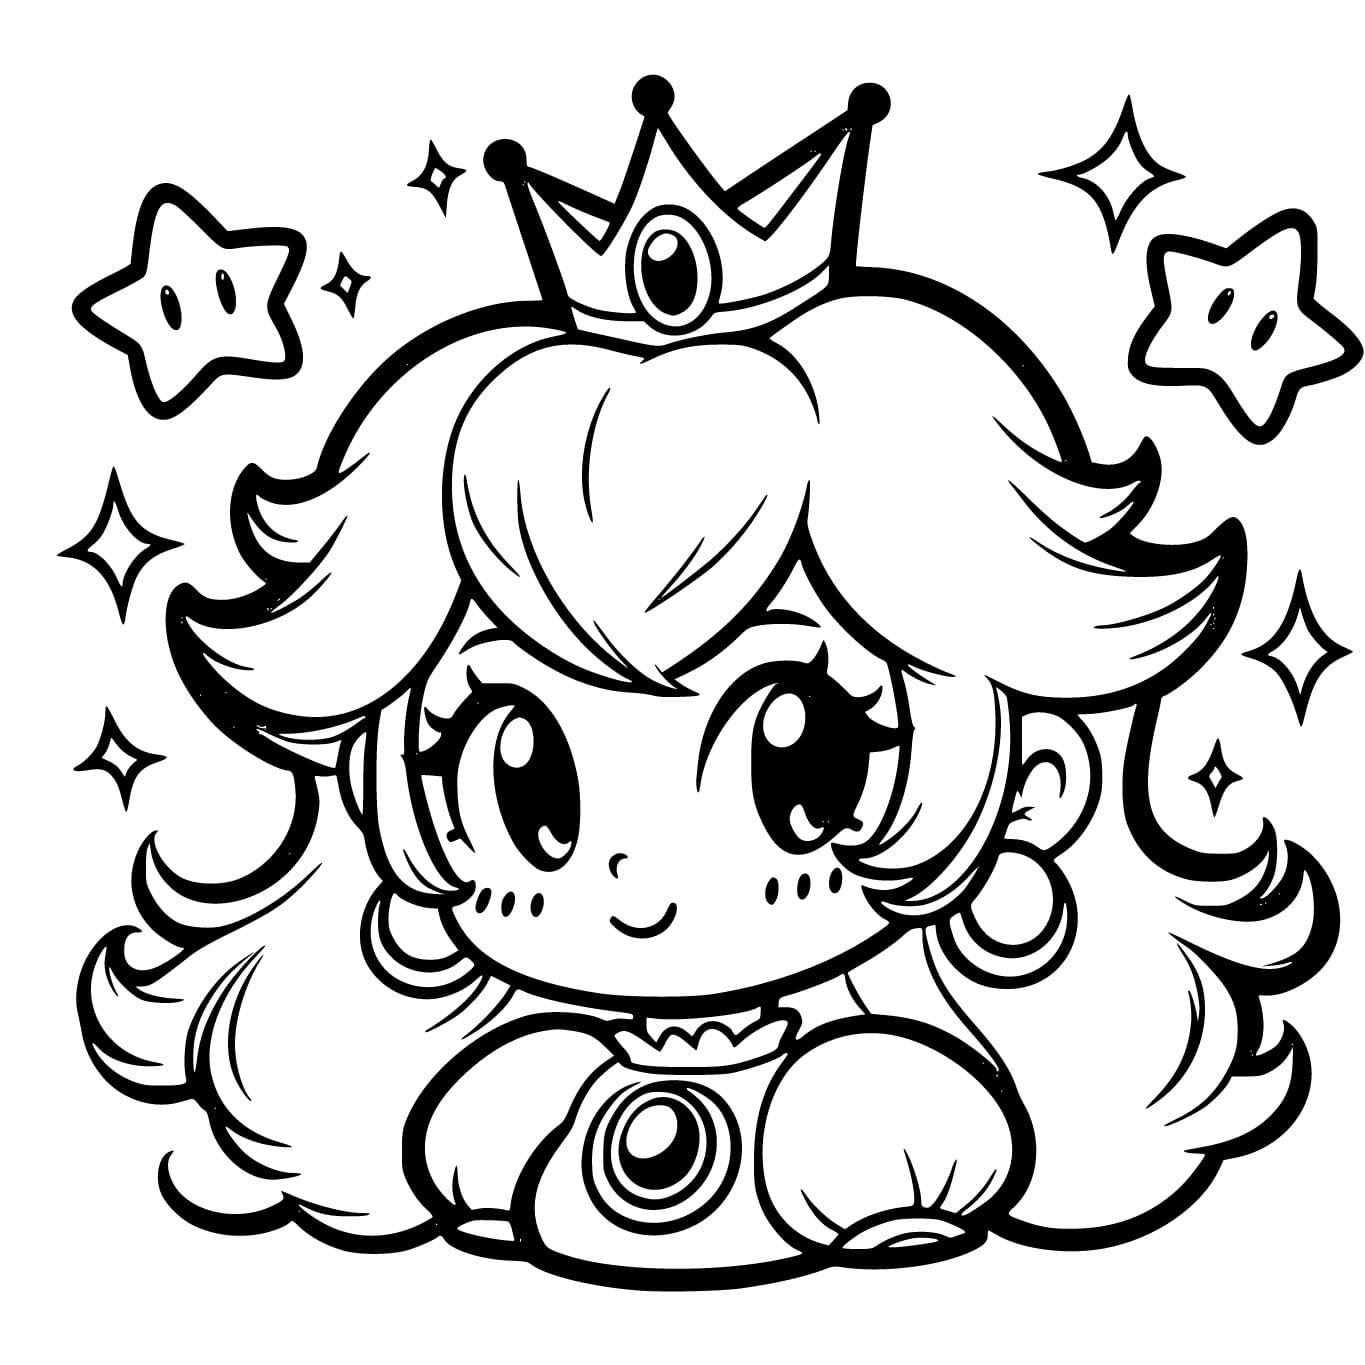 Petite Peach coloring page